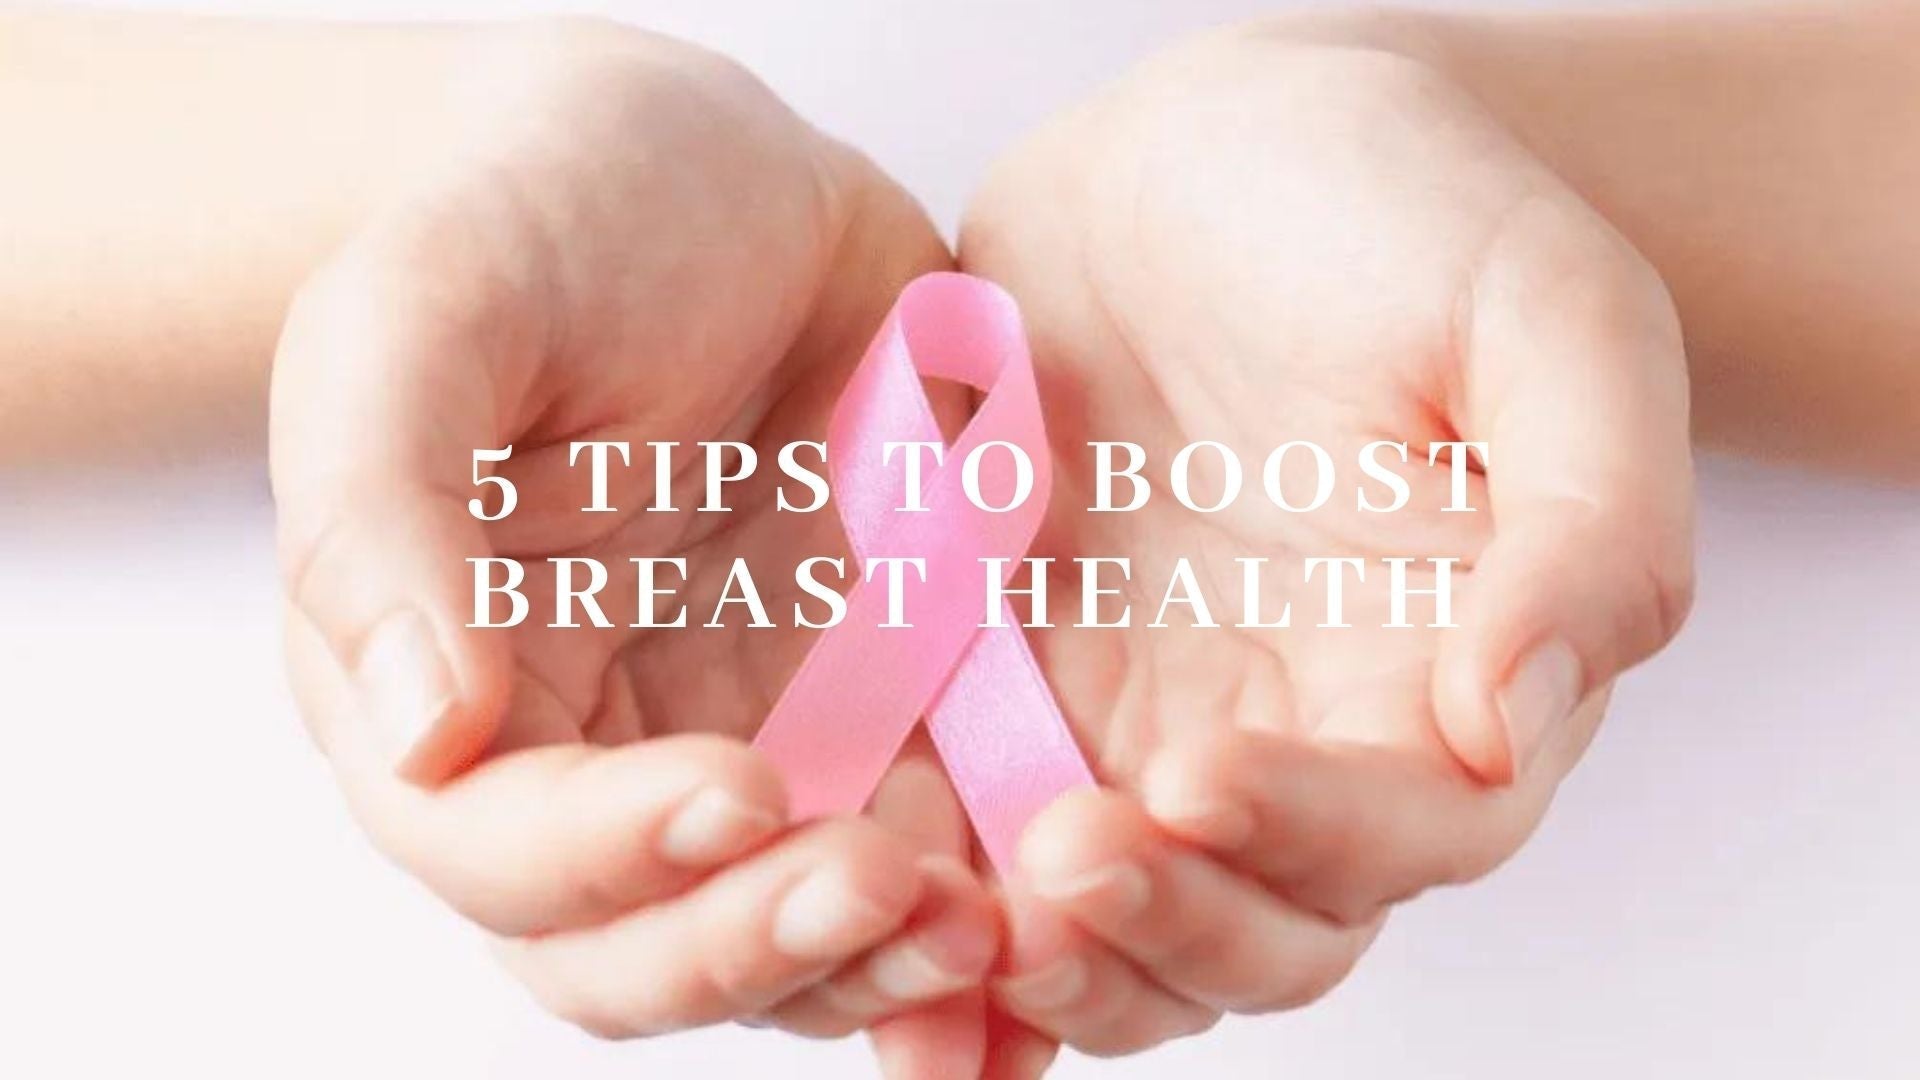 5 tips to Boost Breast Health